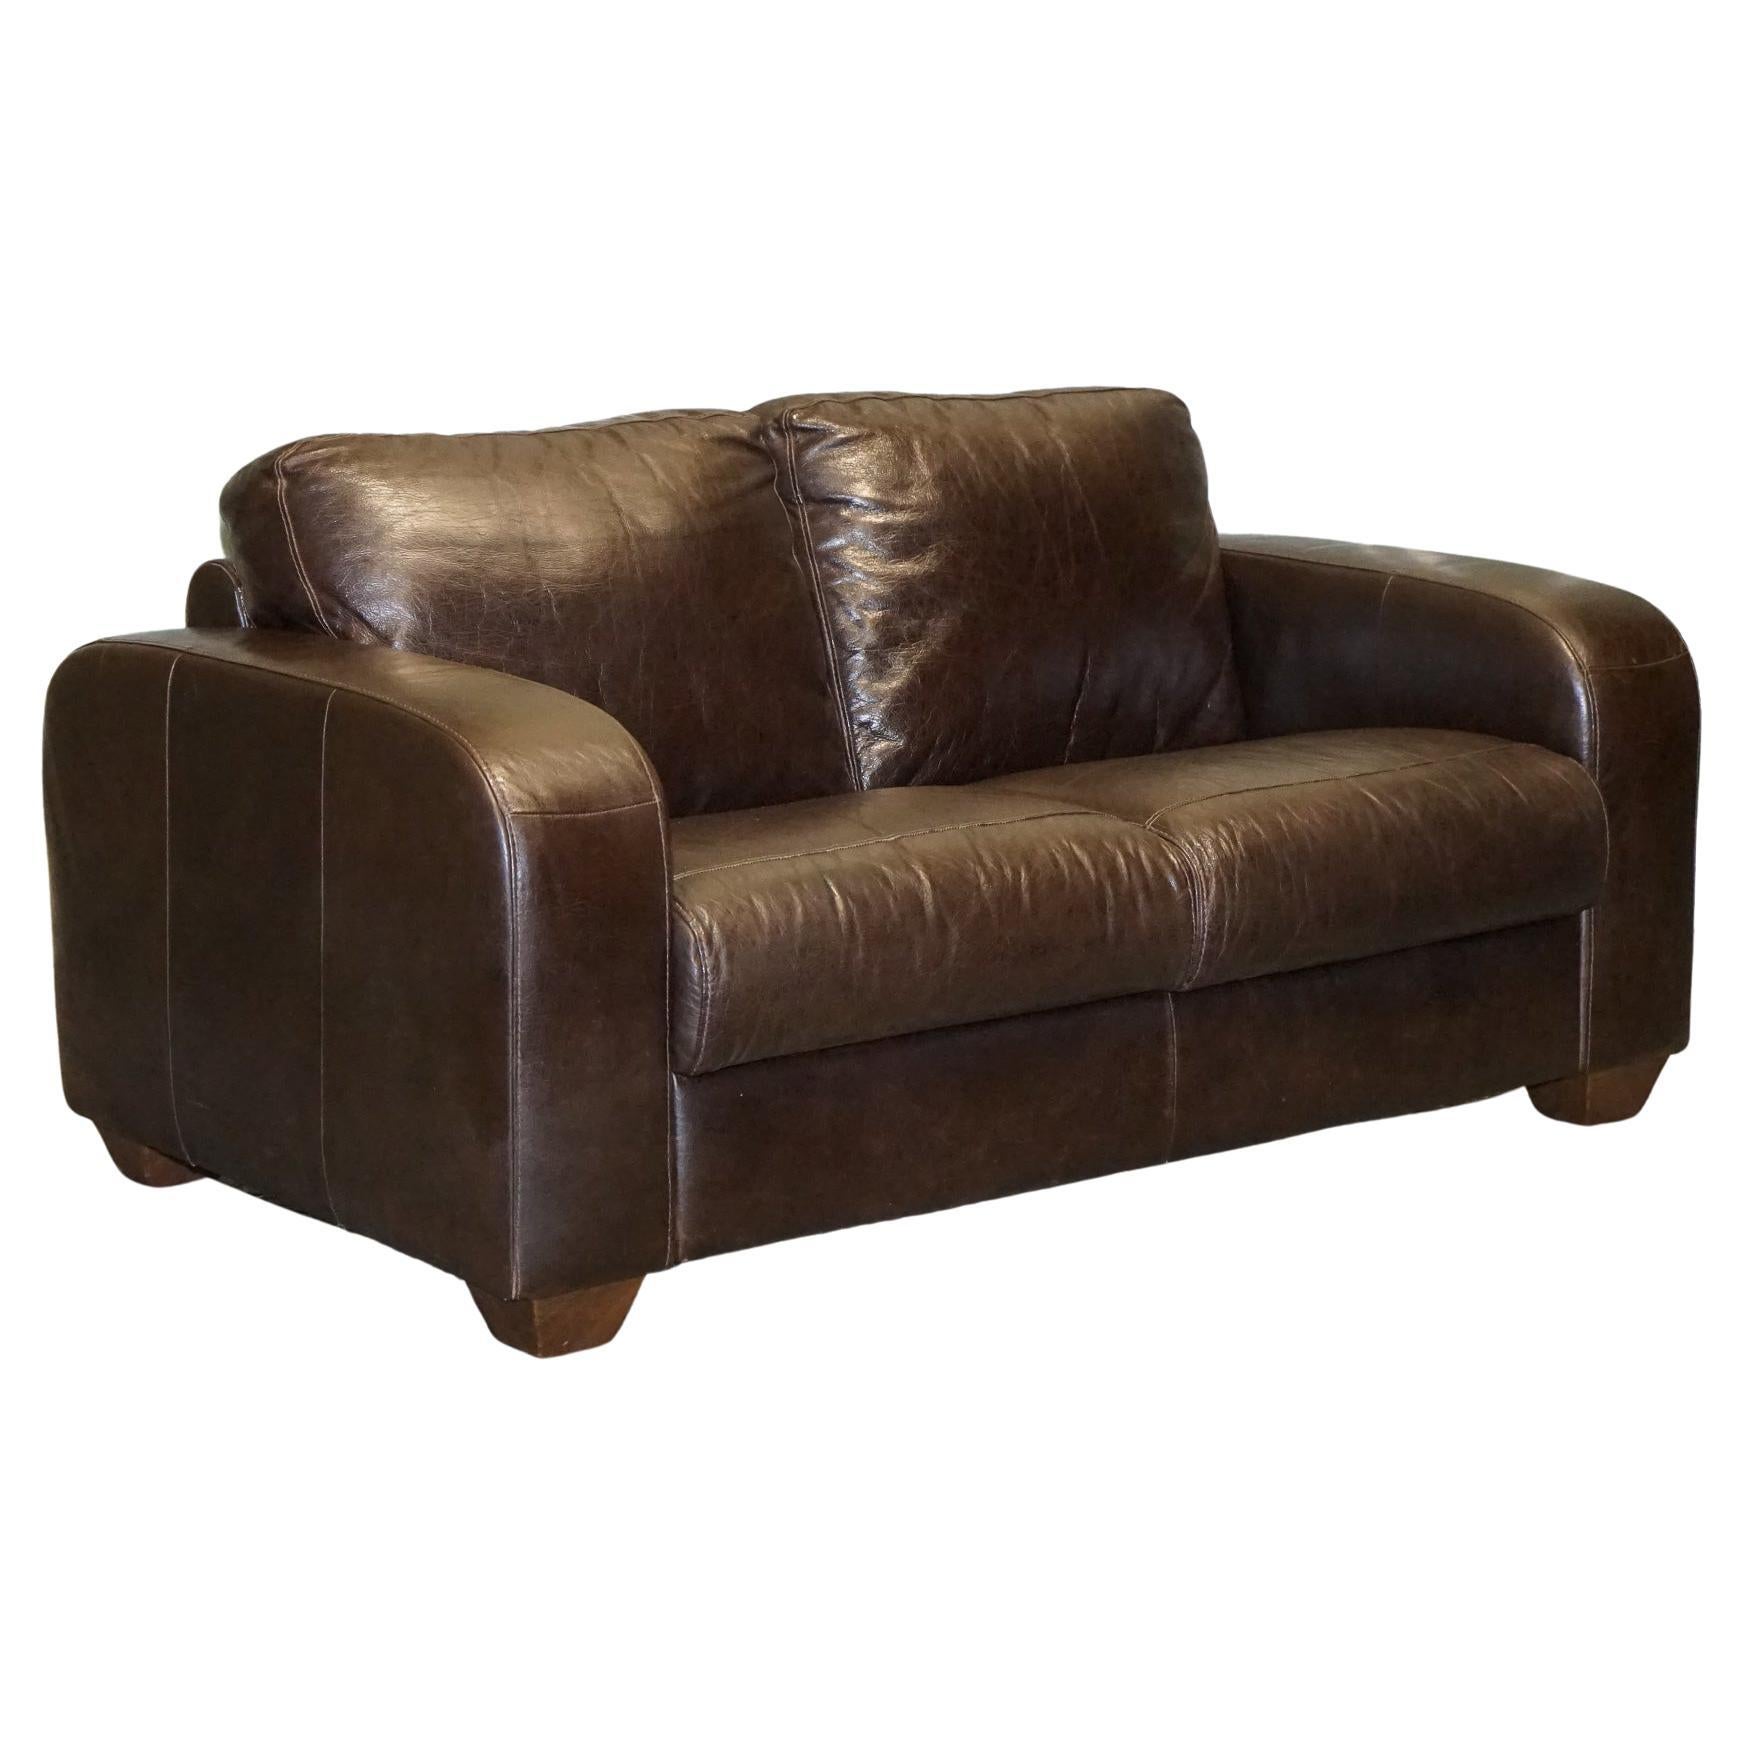 Vintage Chocolate Brown Leather Two Seater Sofa by Sofitalia For Sale